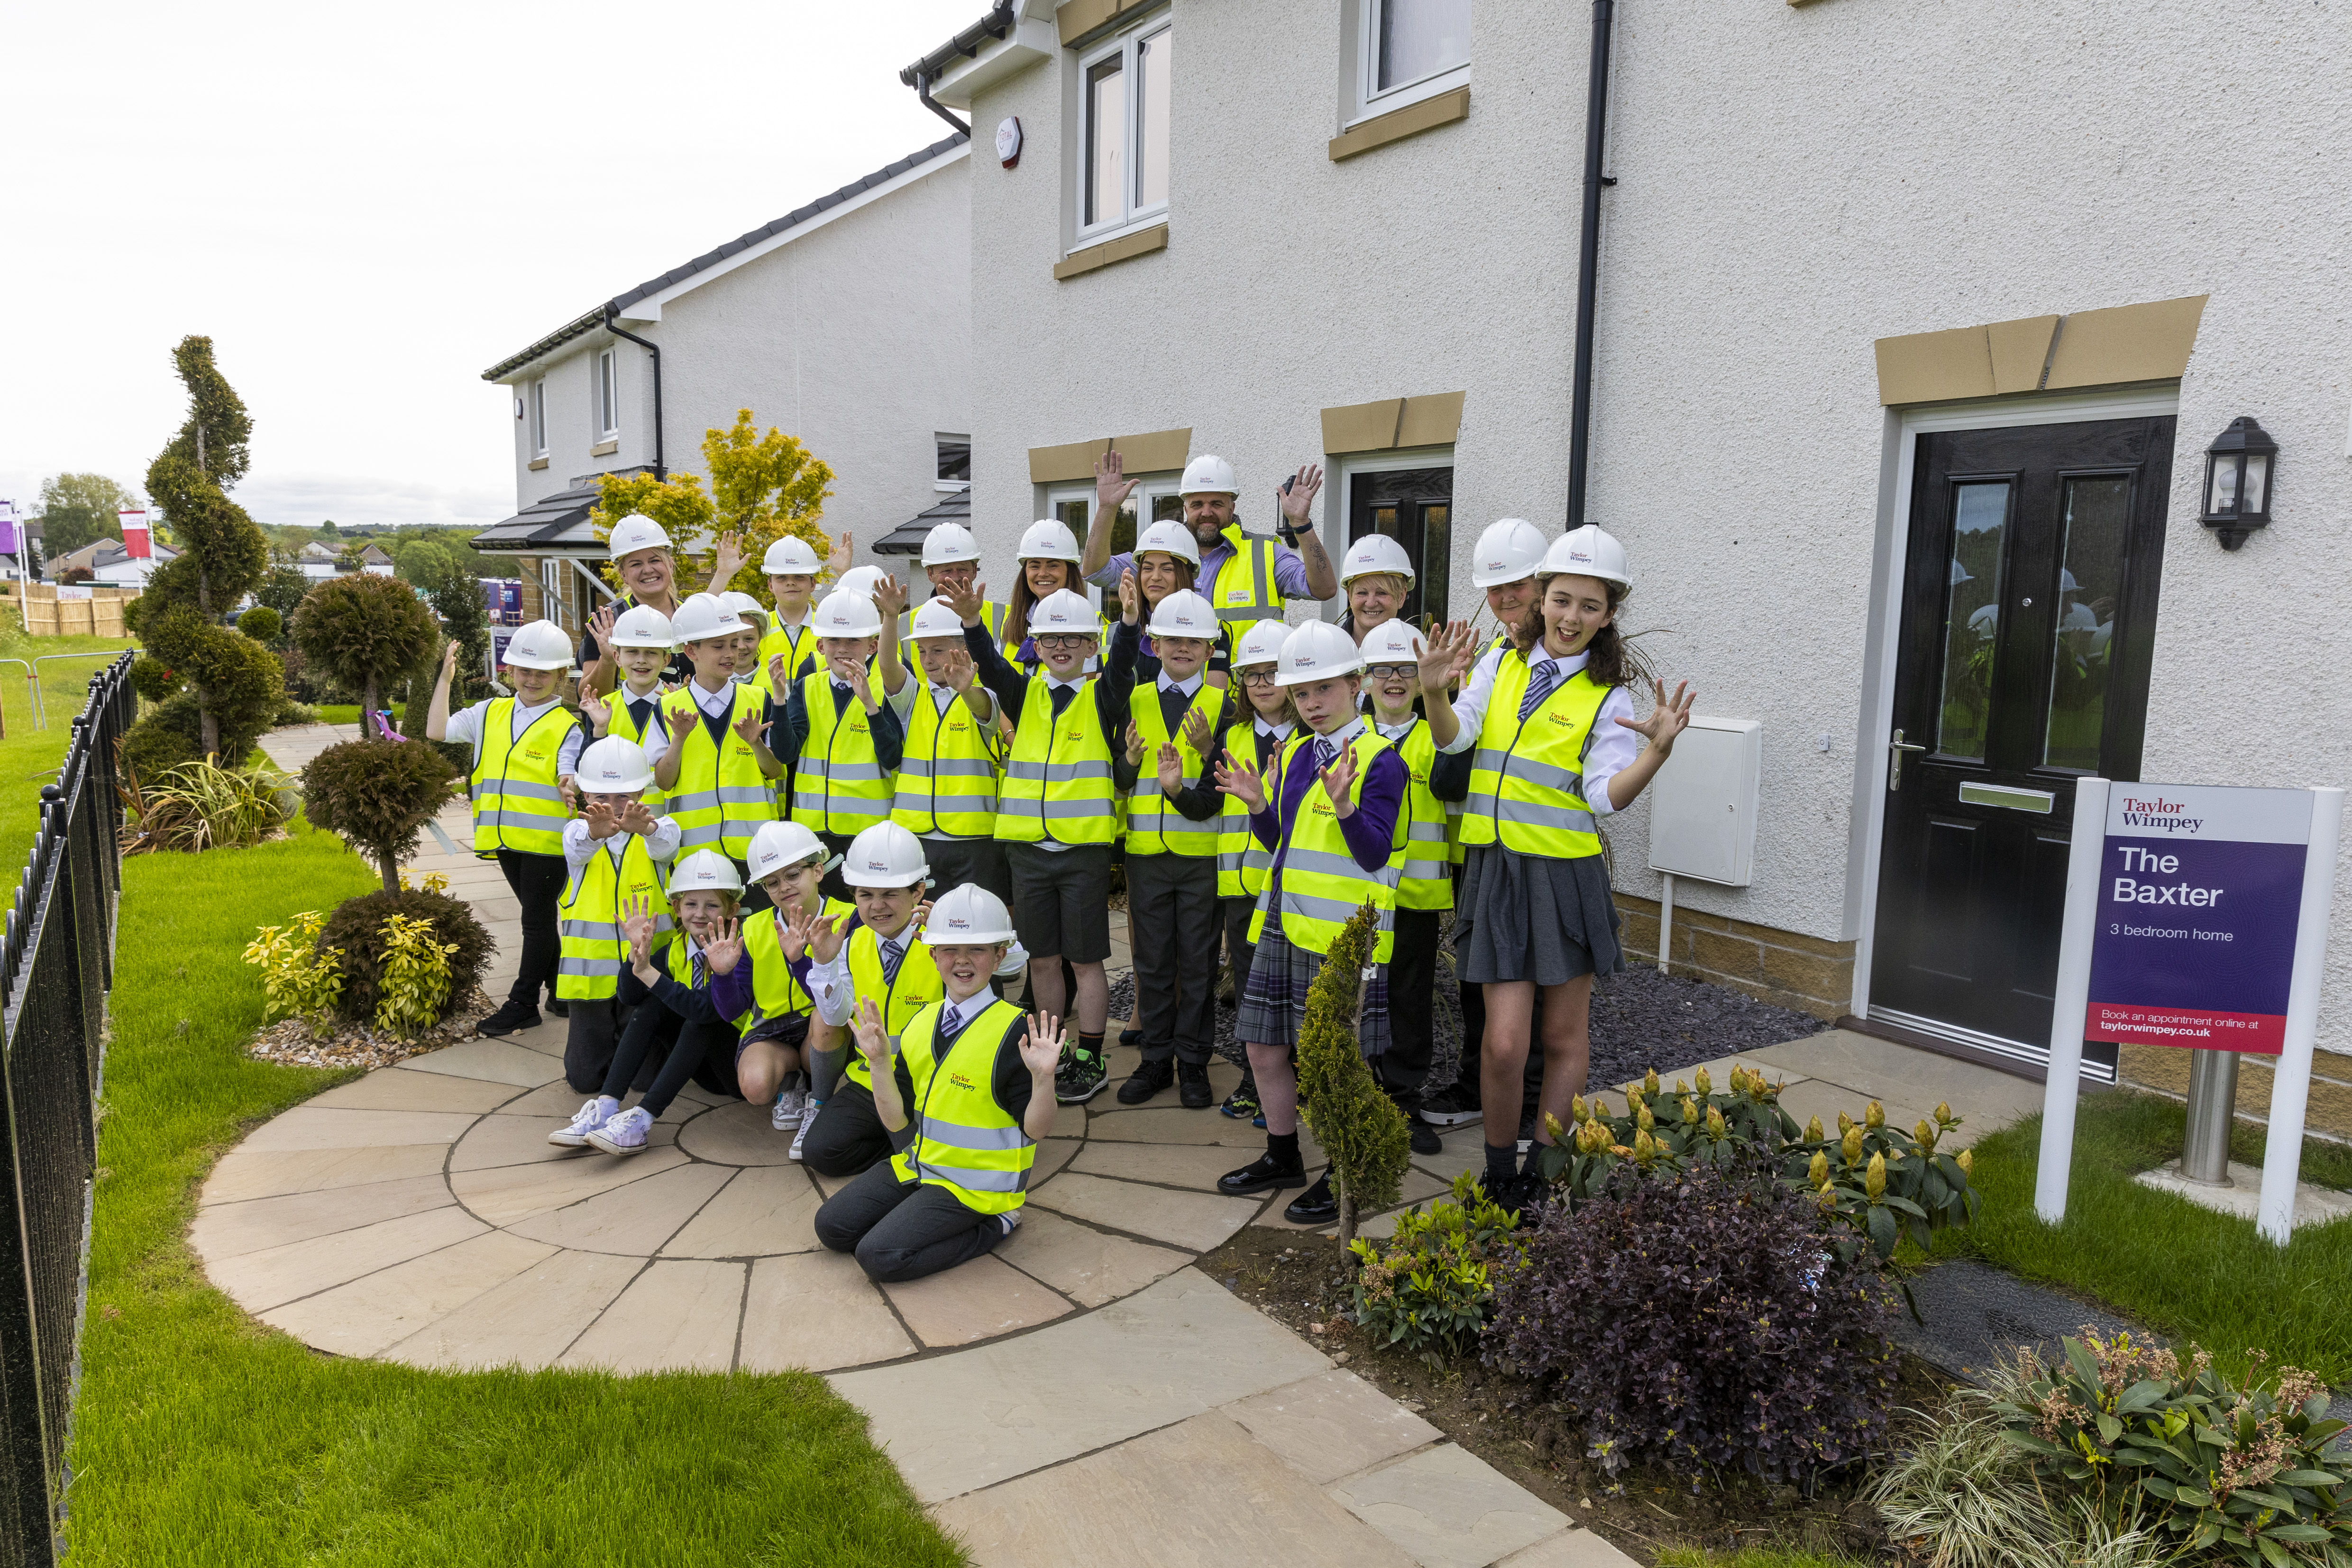 School children get a lesson from Taylor Wimpey in Glenboig